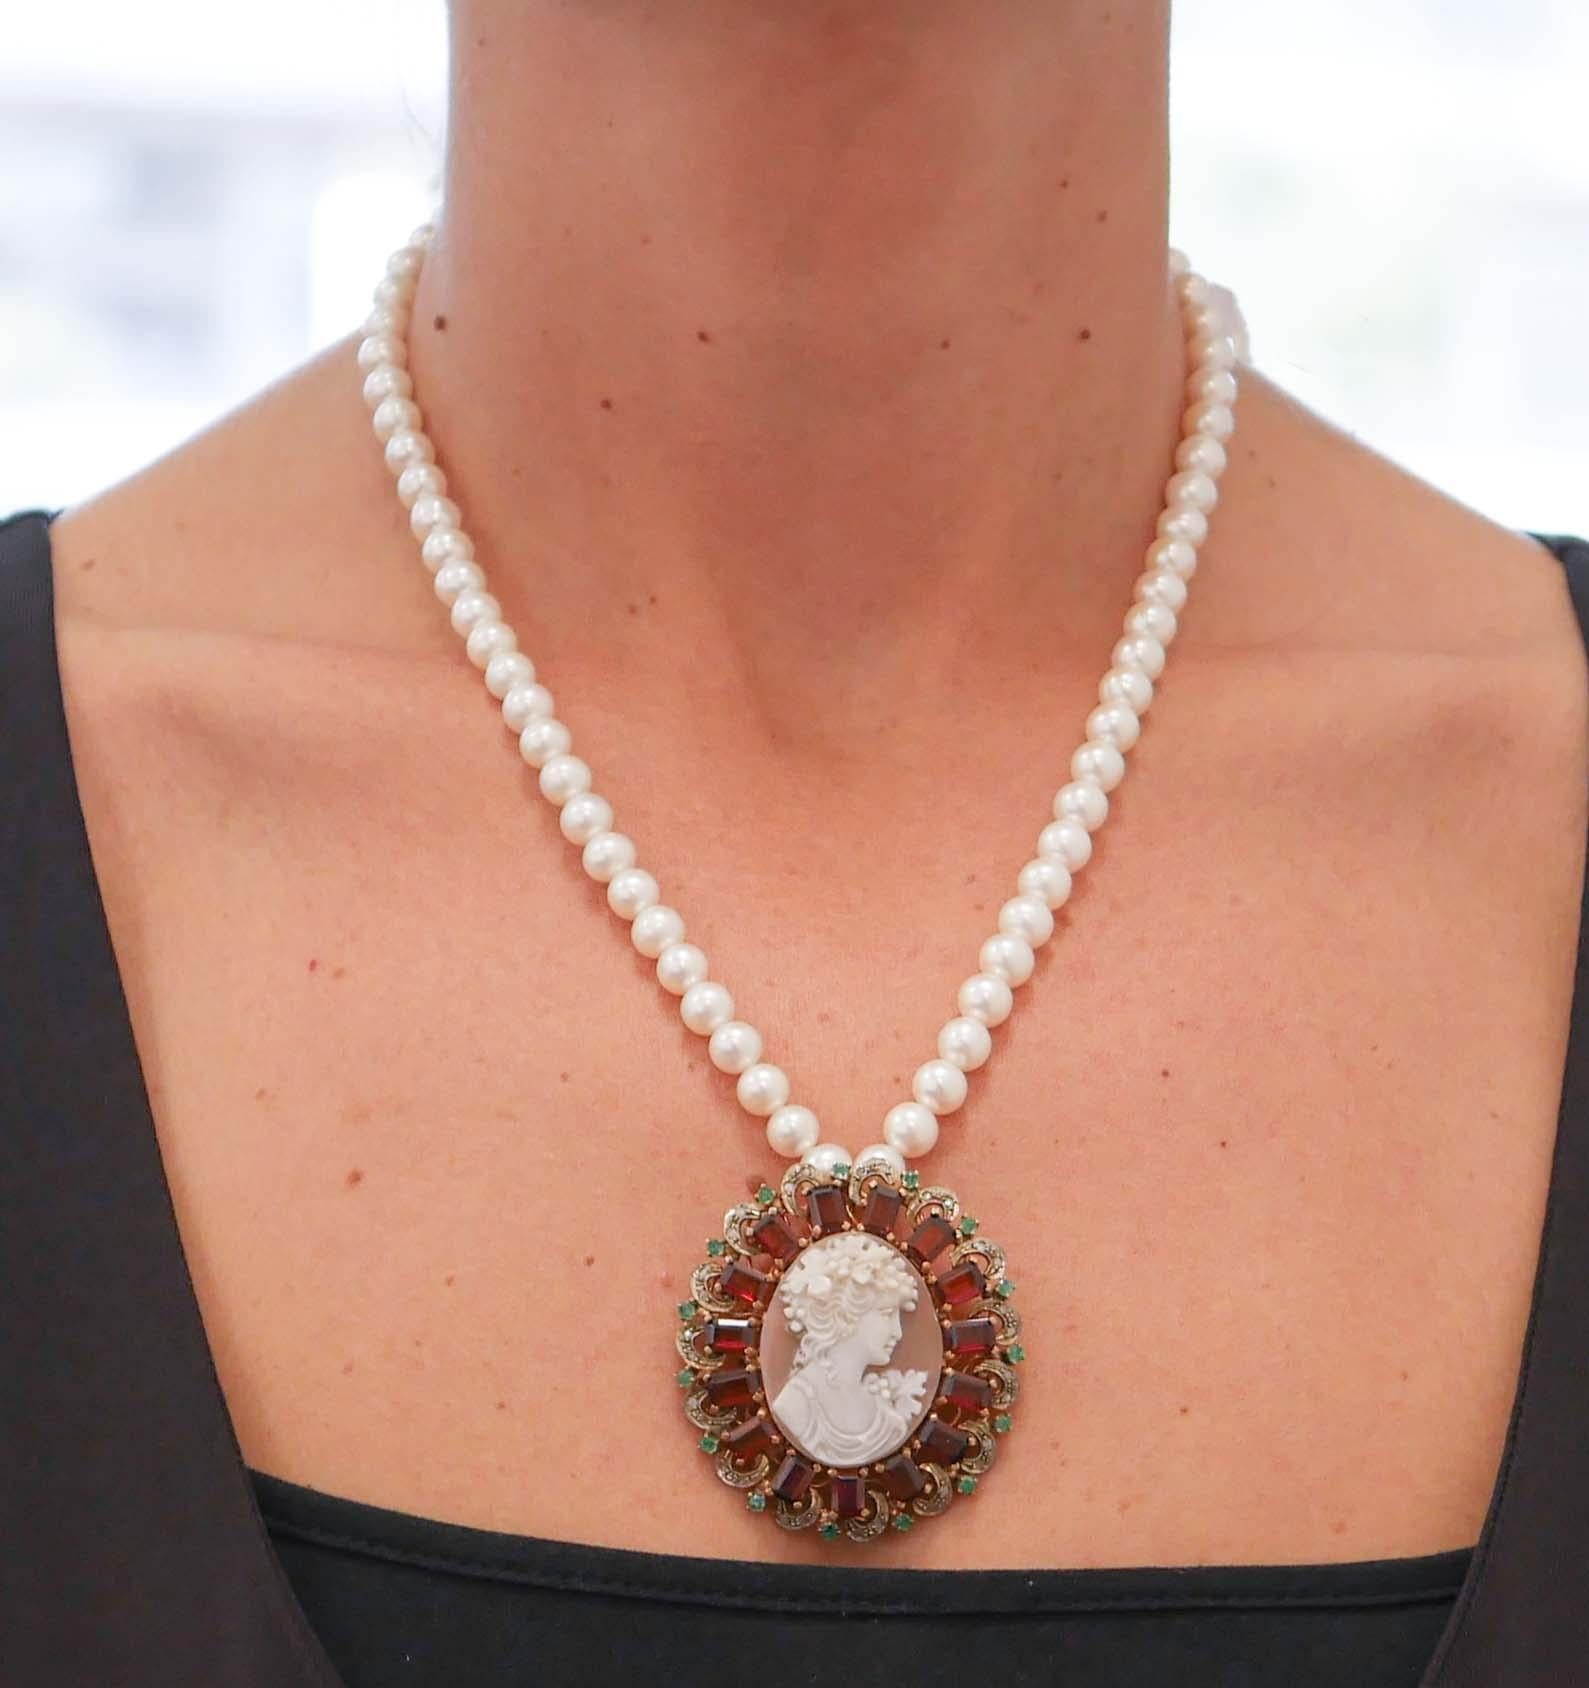 Women's Cameo, Garnets, Emeralds, Diamonds, Pearls,  Gold and Silver Pendant Necklace For Sale